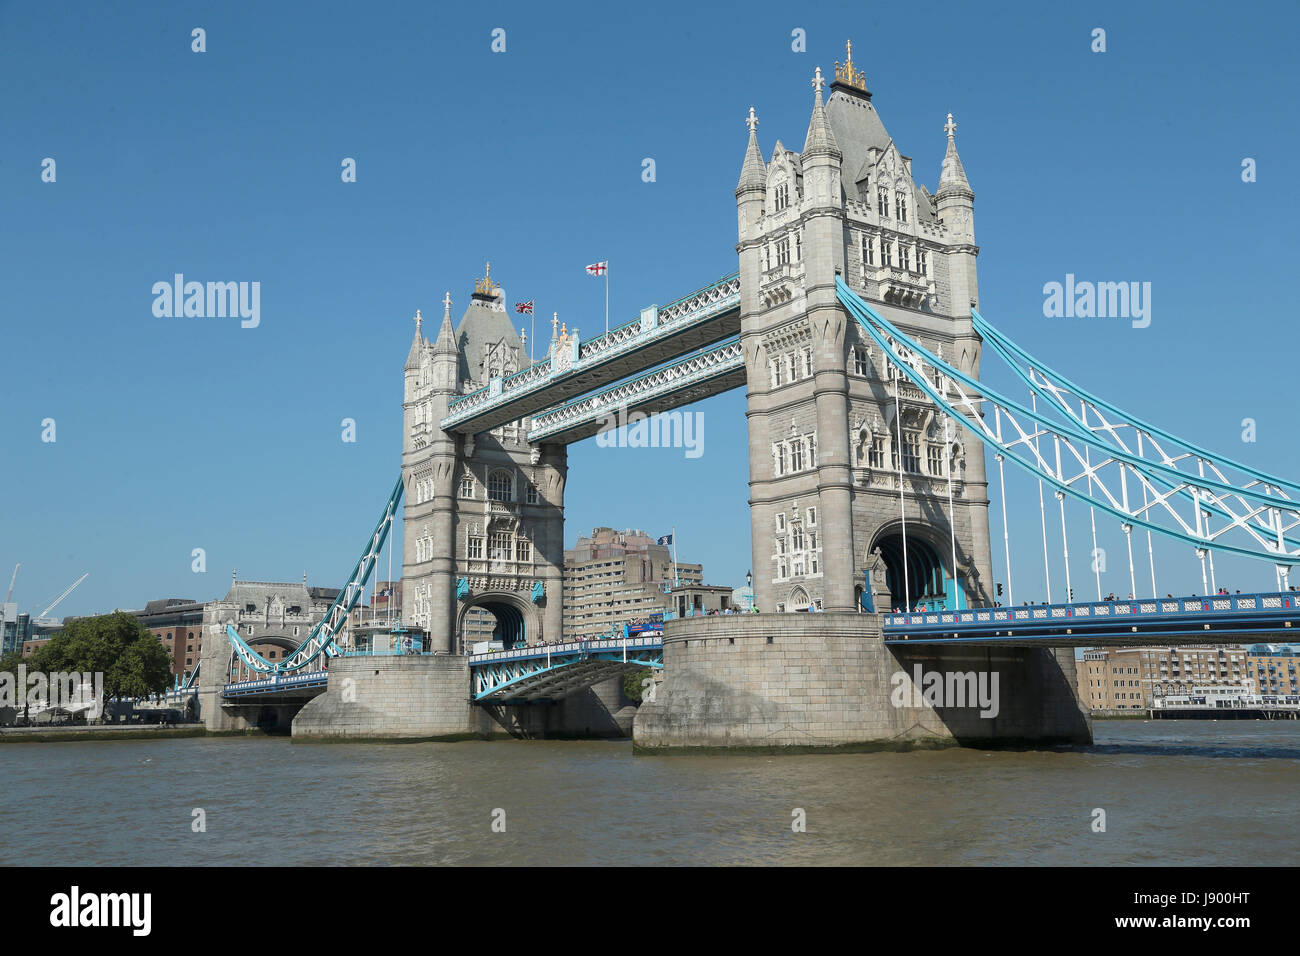 The iconic Tower Bridge in London, one of the most famous buildings in the world which was built over 120 years ago. Stock Photo